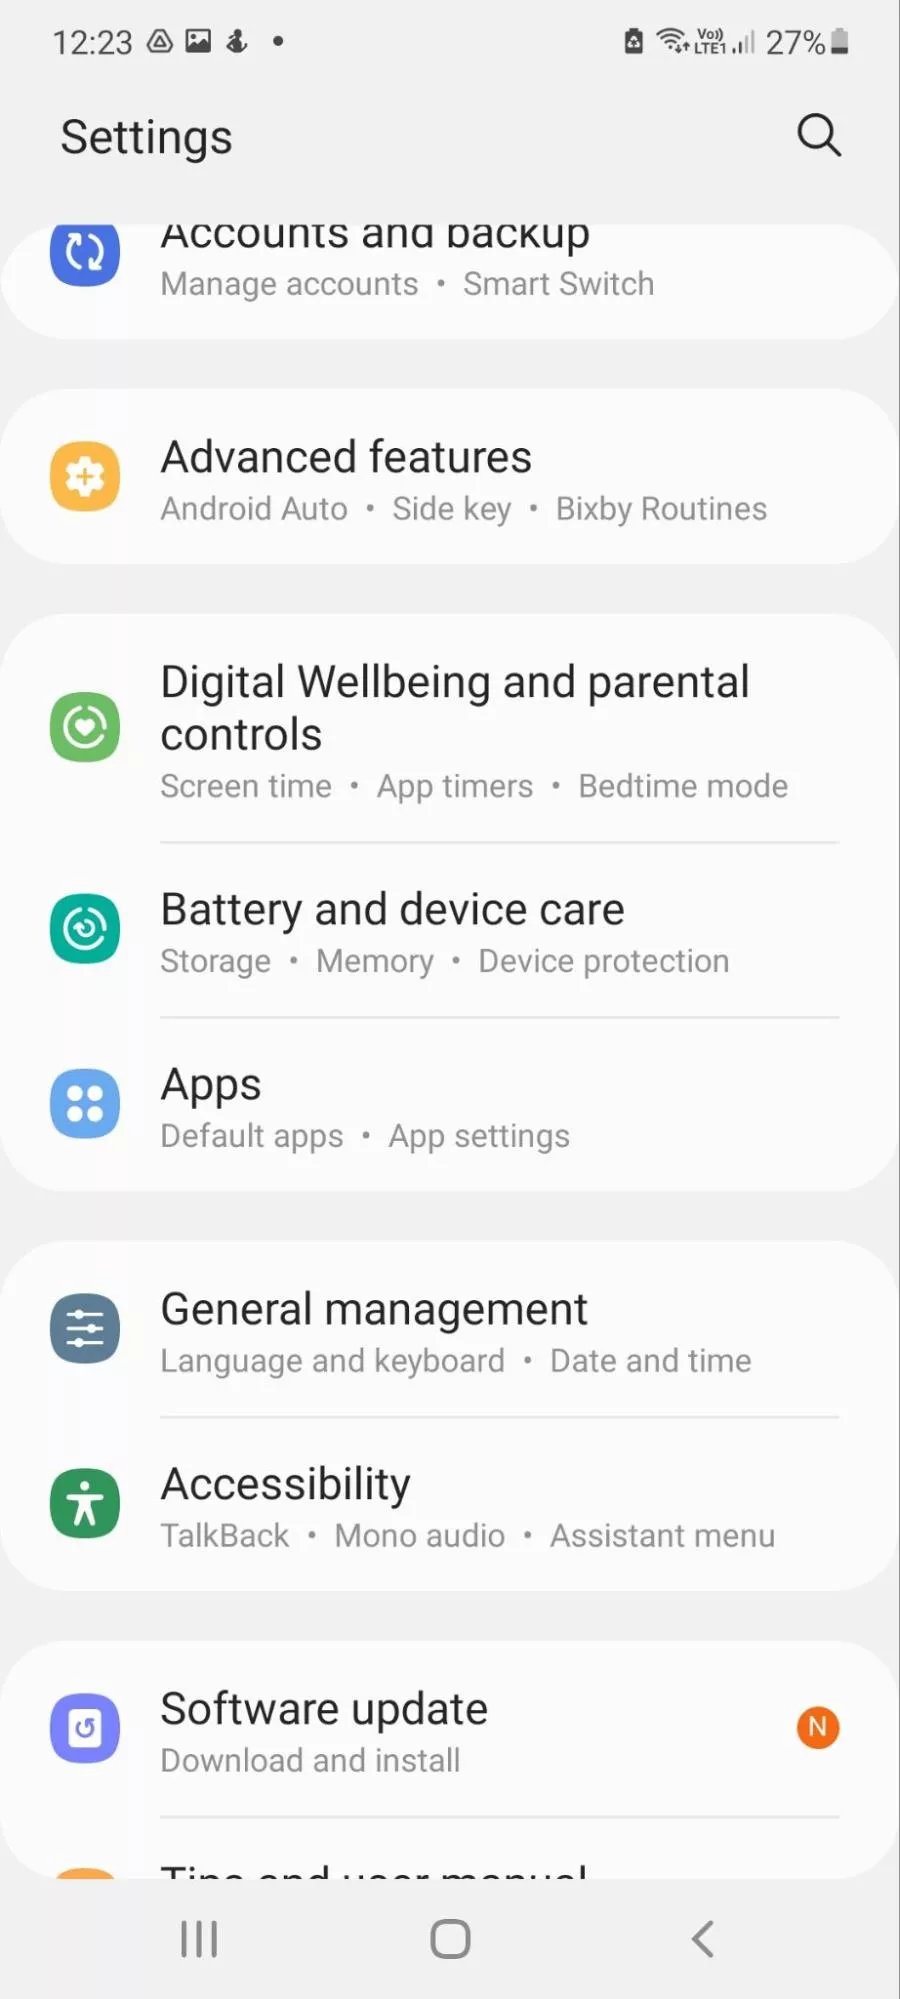 How to Control Screen Time on Android With Google Family Link